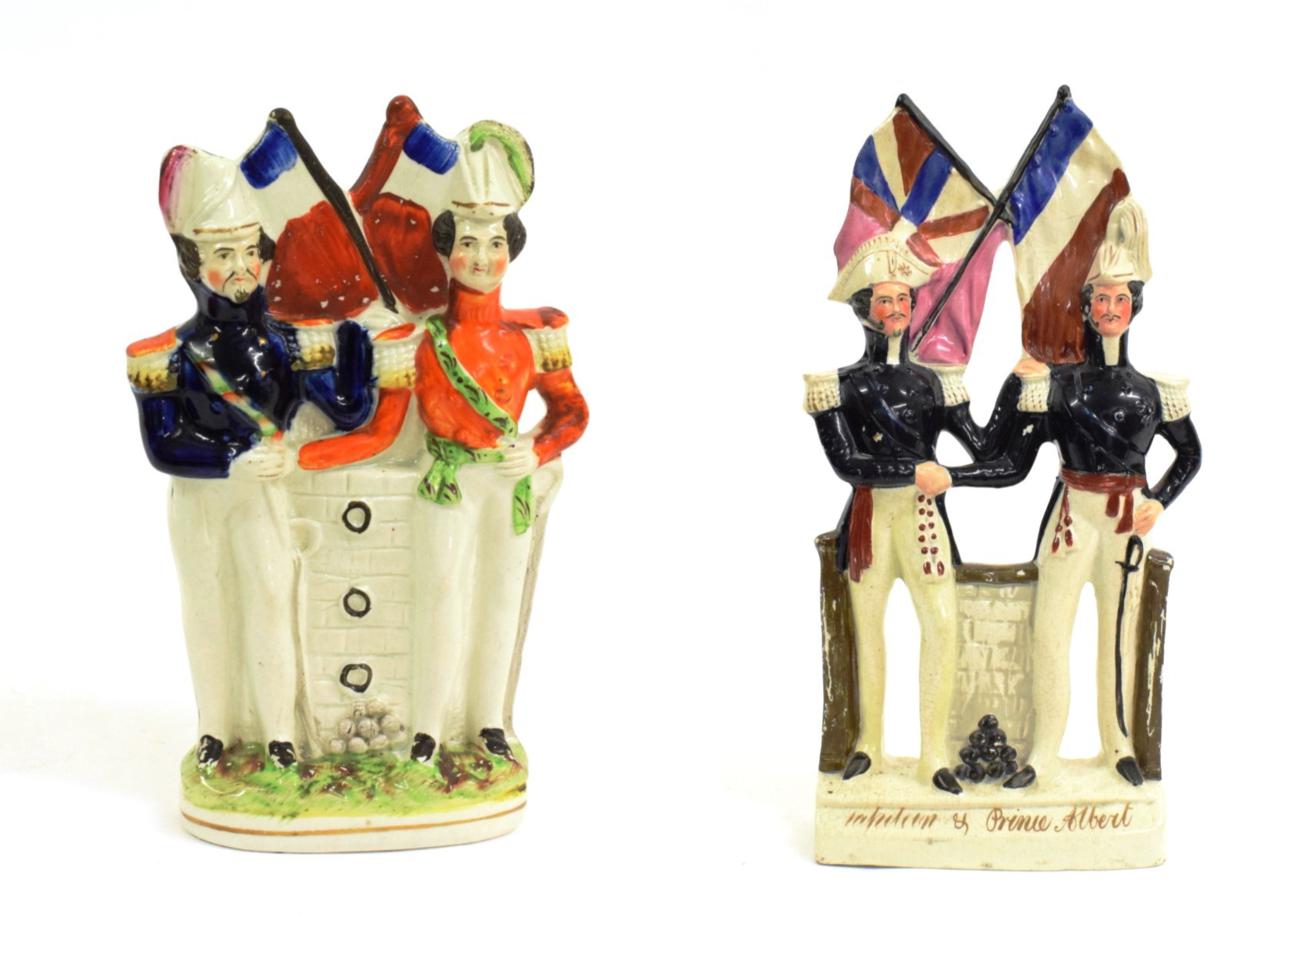 Lot 1050 - A Staffordshire Pottery Crimean War Alliance Figure Group, mid 19th century, with Napoleon III...